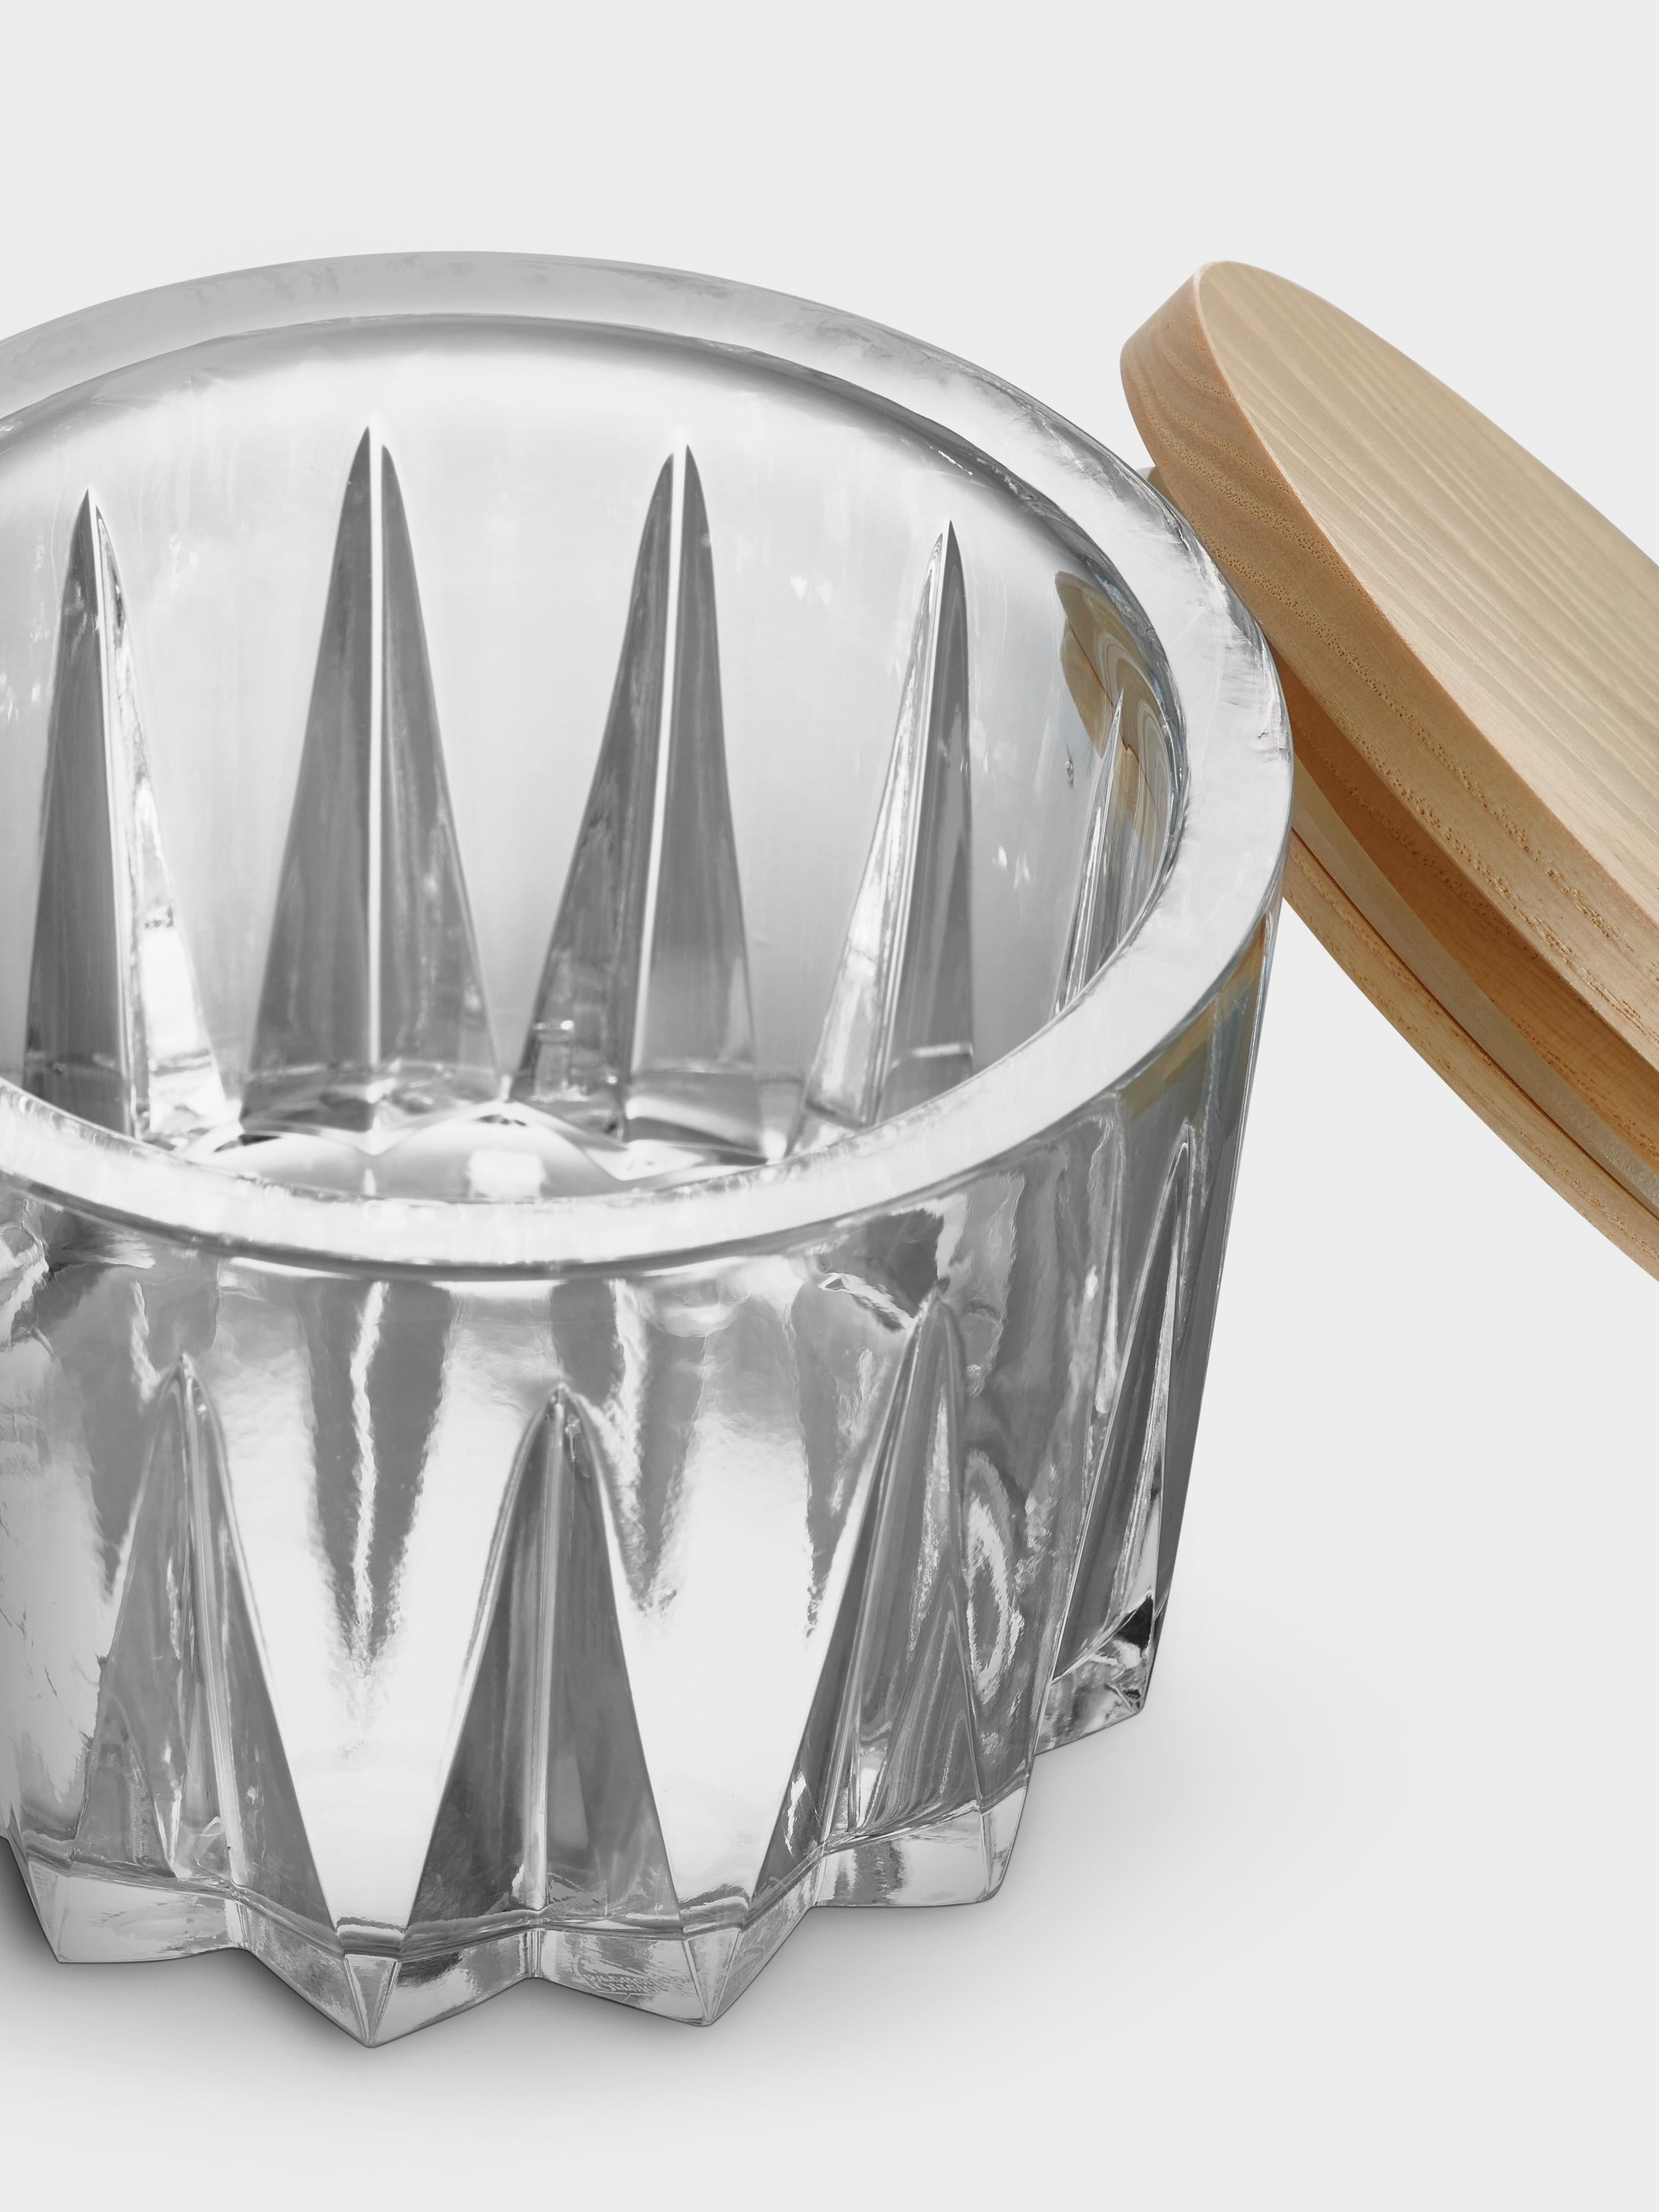 Sarek from Orrefors has deep-cut facets inspired by the motif on wooden baskets made of plaited birch bark, which has a symbolic connection to Swedish nature. The thick crystal bowl has a lid in pale ash wood, providing contrast to the clear glass.
